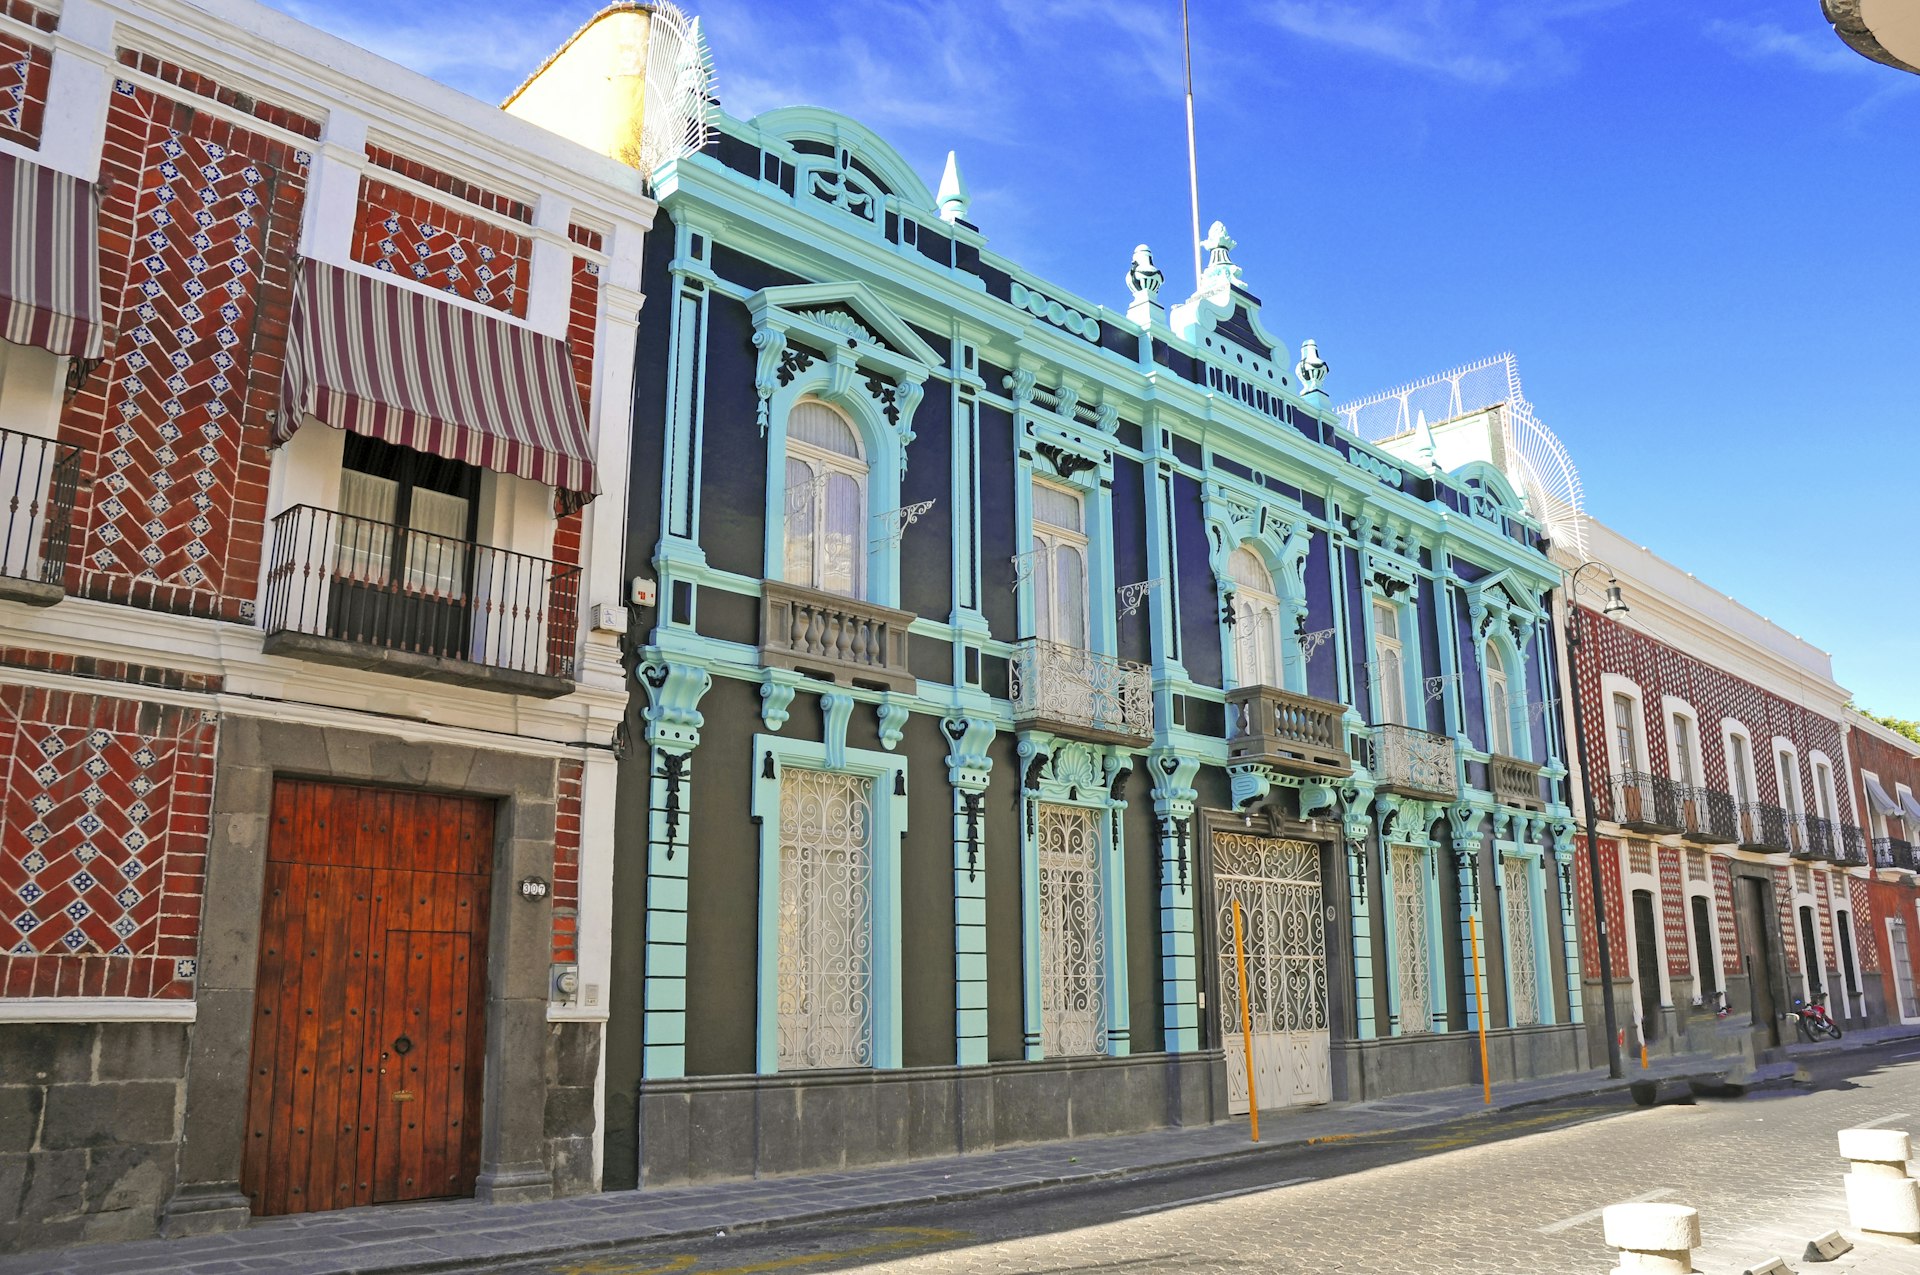 Bright Colorful Buildings in Puebla, Mexico © Robert Cicchetti / Getty Images